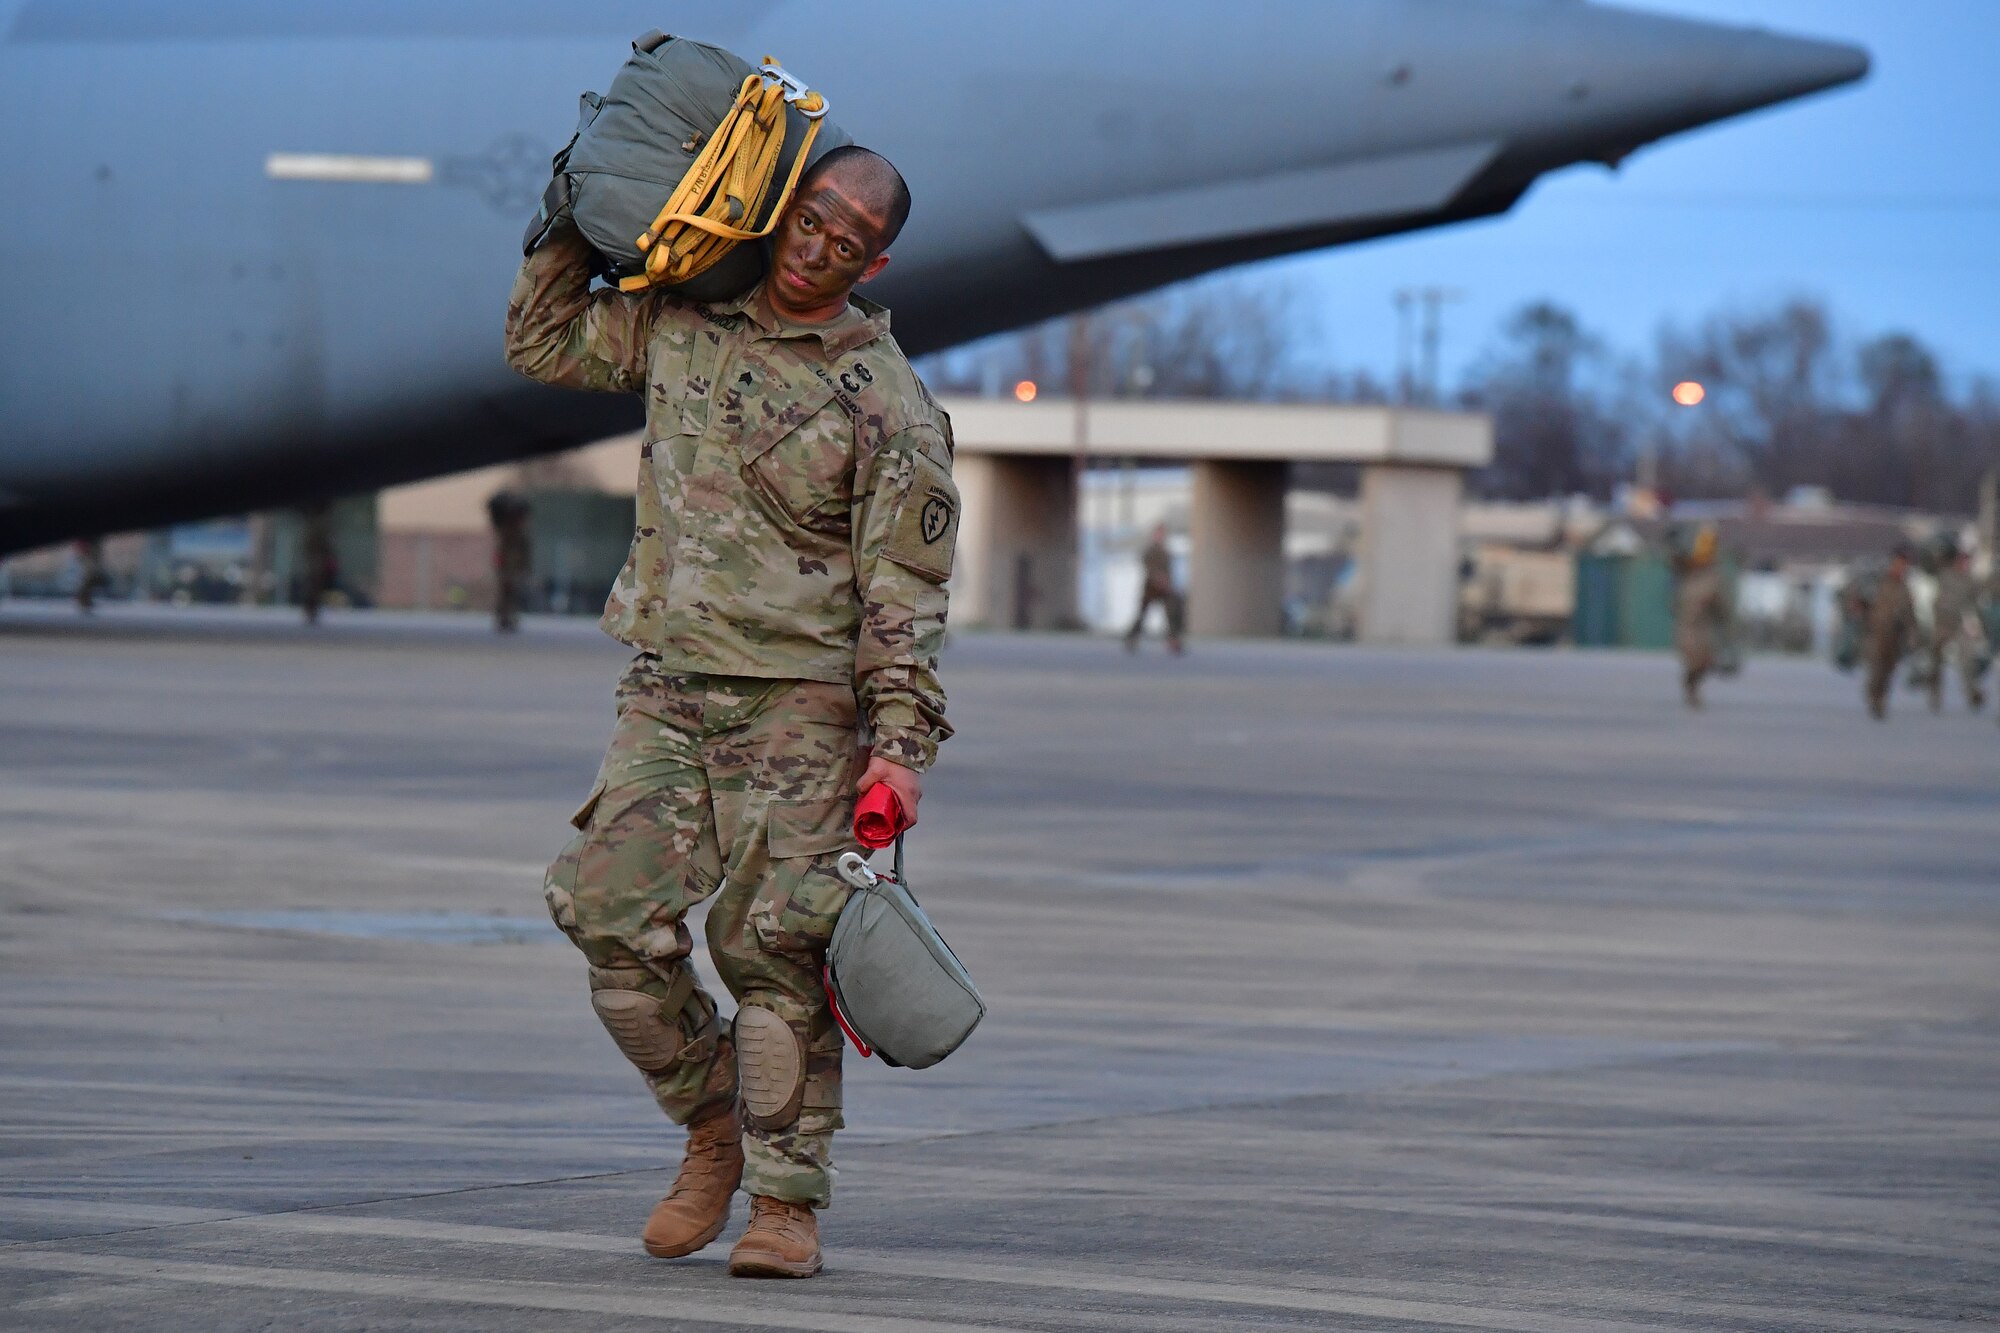 A soldier from the 4th Brigade Combat Team (Airborne), 25th Infantry Division, at Joint Base Elmendorf-Richardson, Alaska, walks to a C-17 Globemaster III during the joint forcible entry and airborne assault which kicked off Green Flag Little Rock 20-03.